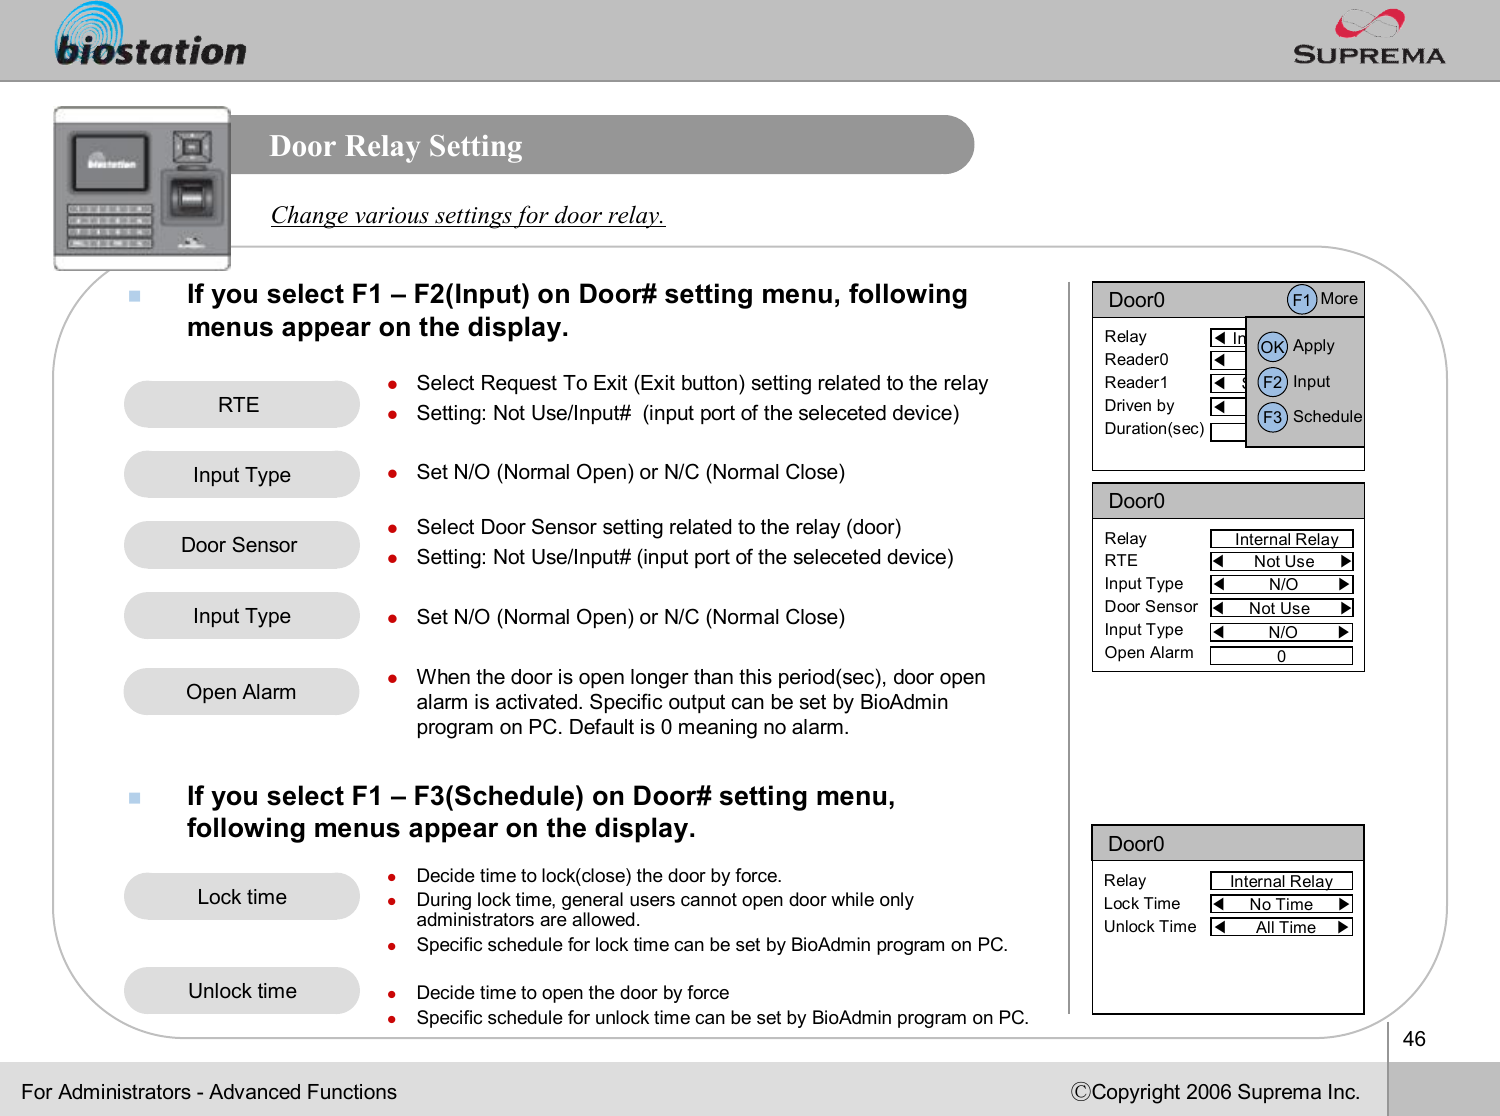 46ⒸCopyright 2006 Suprema Inc.Door Relay SettingnIf you select F1 –F2(Input) on Door# setting menu, following menus appear on the display. nIf you select F1 –F3(Schedule) on Door# setting menu, following menus appear on the display. Change various settings for door relay.lSelect Request To Exit (Exit button) setting related to the relaylSetting: Not Use/Input#  (input port of the seleceteddevice)lSet N/O (Normal Open) or N/C (Normal Close)lSelect Door Sensor setting related to the relay (door)lSetting: Not Use/Input# (input port of the seleceteddevice)lSet N/O (Normal Open) or N/C (Normal Close)lWhen the door is open longer than this period(sec), door open alarm is activated. Specific output can be set by BioAdminprogram on PC. Default is 0 meaning no alarm. lDecide time to lock(close) the door by force. lDuring lock time, general users cannot open door while only administrators are allowed.lSpecific schedule for lock time can be set by BioAdmin program on PC.lDecide time to open the door by forcelSpecific schedule for unlock time can be set by BioAdmin programon PC.For Administrators -Advanced FunctionsRTE Lock timeUnlock timeDoor0Internal RelayRelayLock TimeUnlock Time◀No Time     ▶◀All Time    ▶Door0◀Internal Relay▶RelayReader0Reader1Driven byDuration(sec)◀Primary     ▶◀Secondary   ▶◀All Event    ▶3F1 MoreOK ApplyF2 InputF3 ScheduleInput TypeDoor Sensor Input TypeOpen AlarmDoor0Internal RelayRelayRTEInput TypeDoor SensorInput TypeOpen Alarm◀Not Use     ▶◀N/O        ▶◀Not Use      ▶0◀N/O        ▶